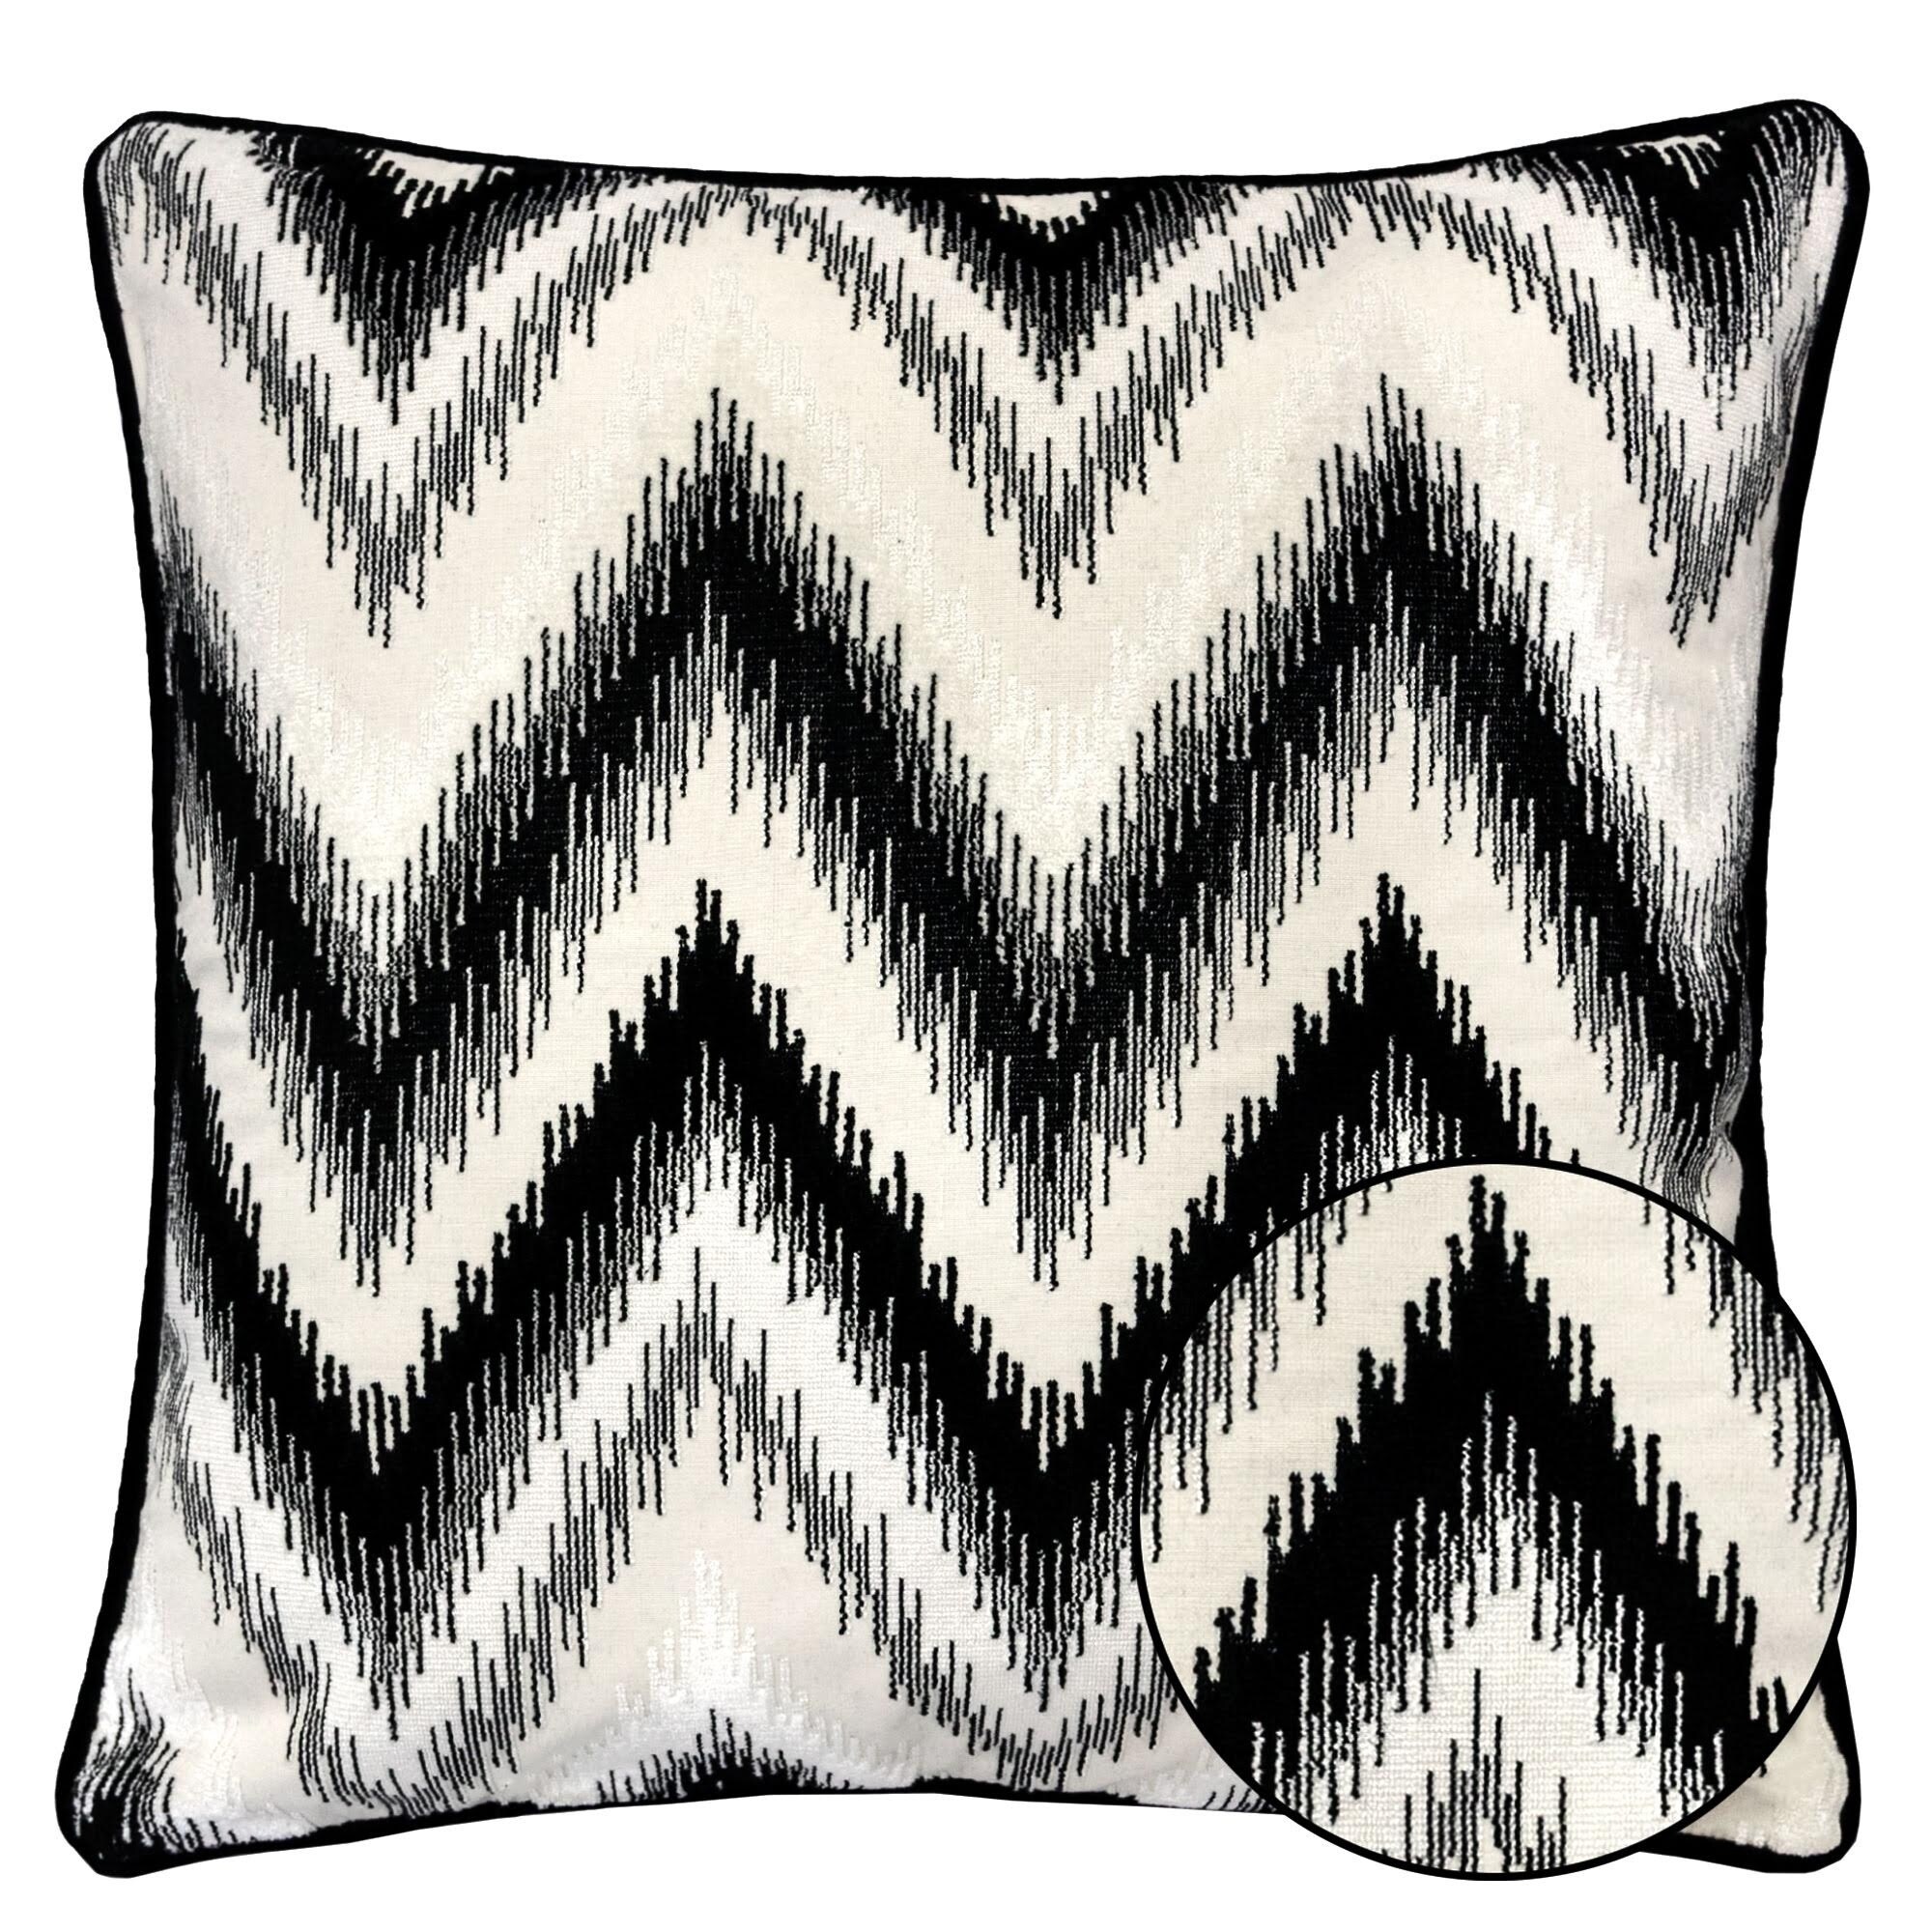 Modern Black Stripe Decorative Throw Pillow Cover Cushion Cover Protector  18 x 18 inches